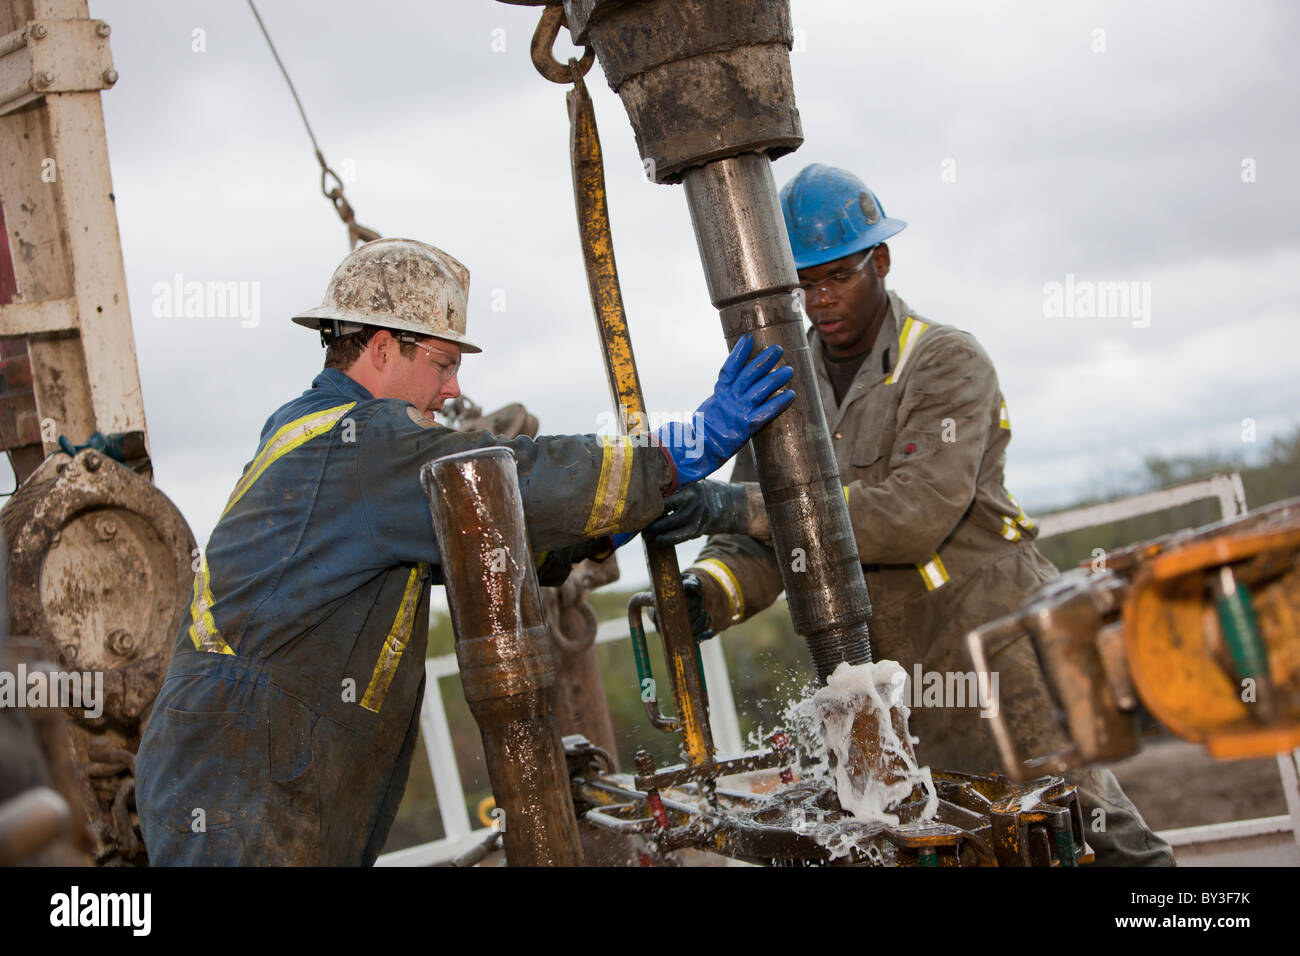 Oil workers drilling for oil on rig Stock Photo